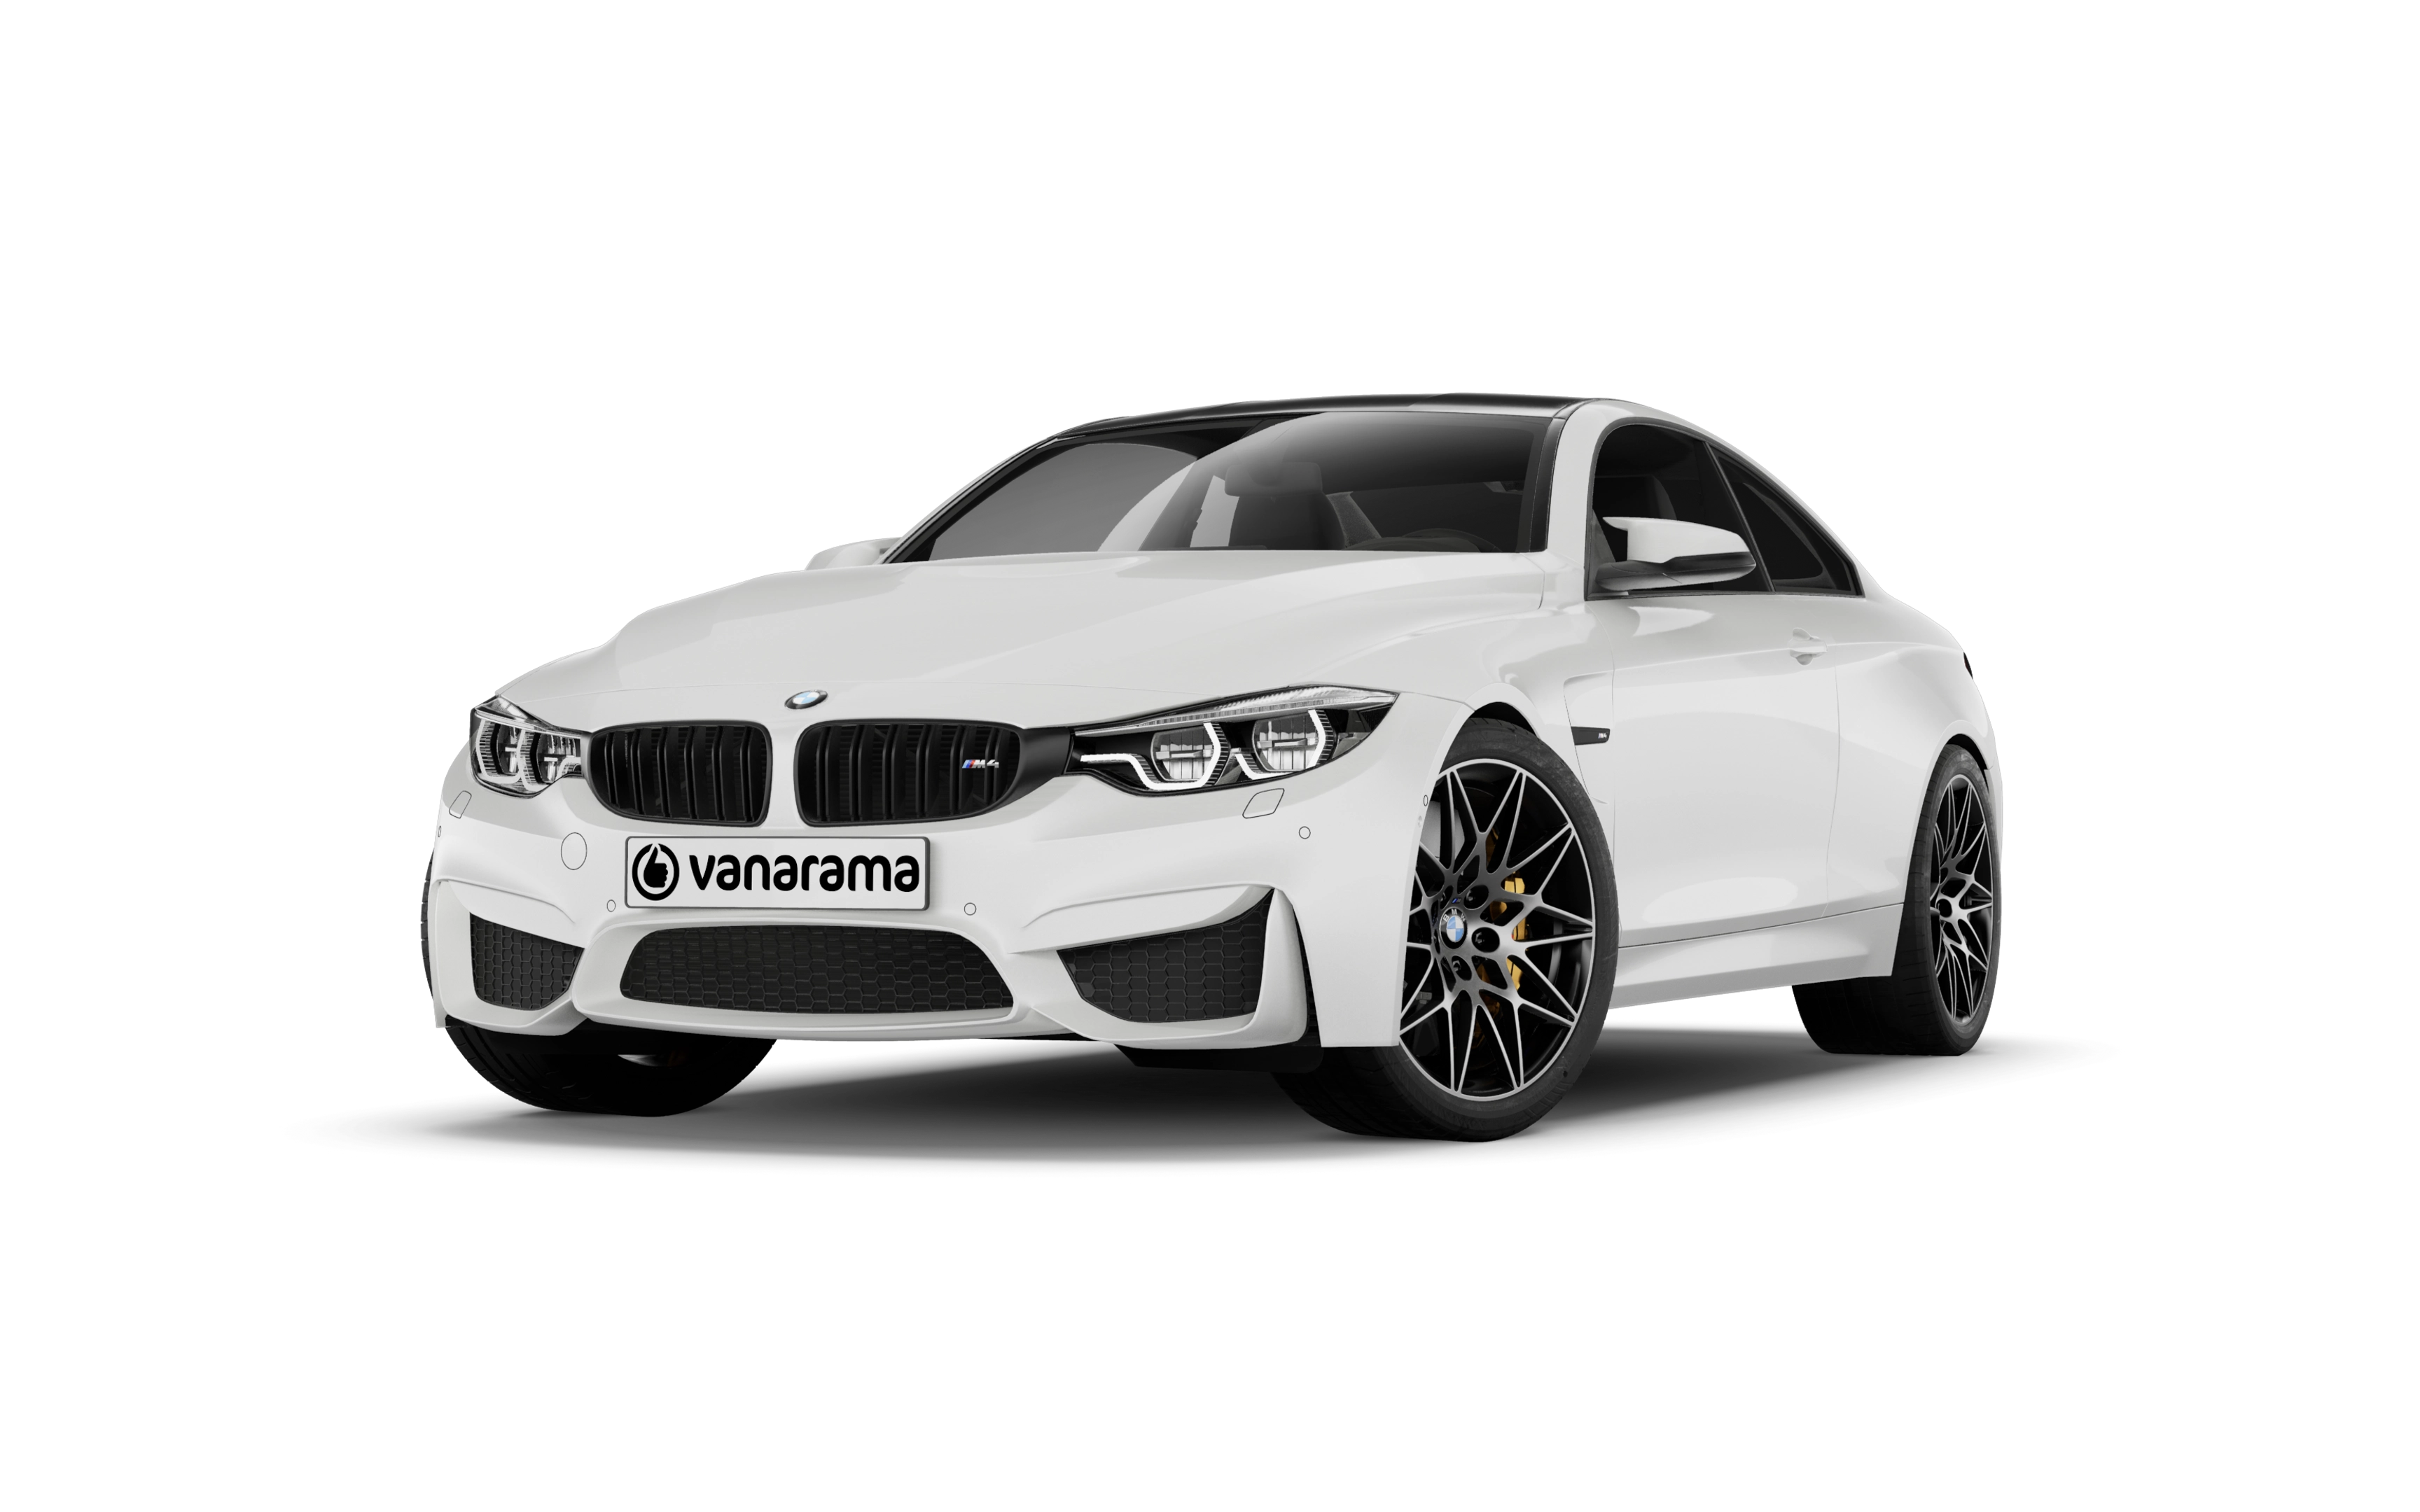 Bmw m4 coupe